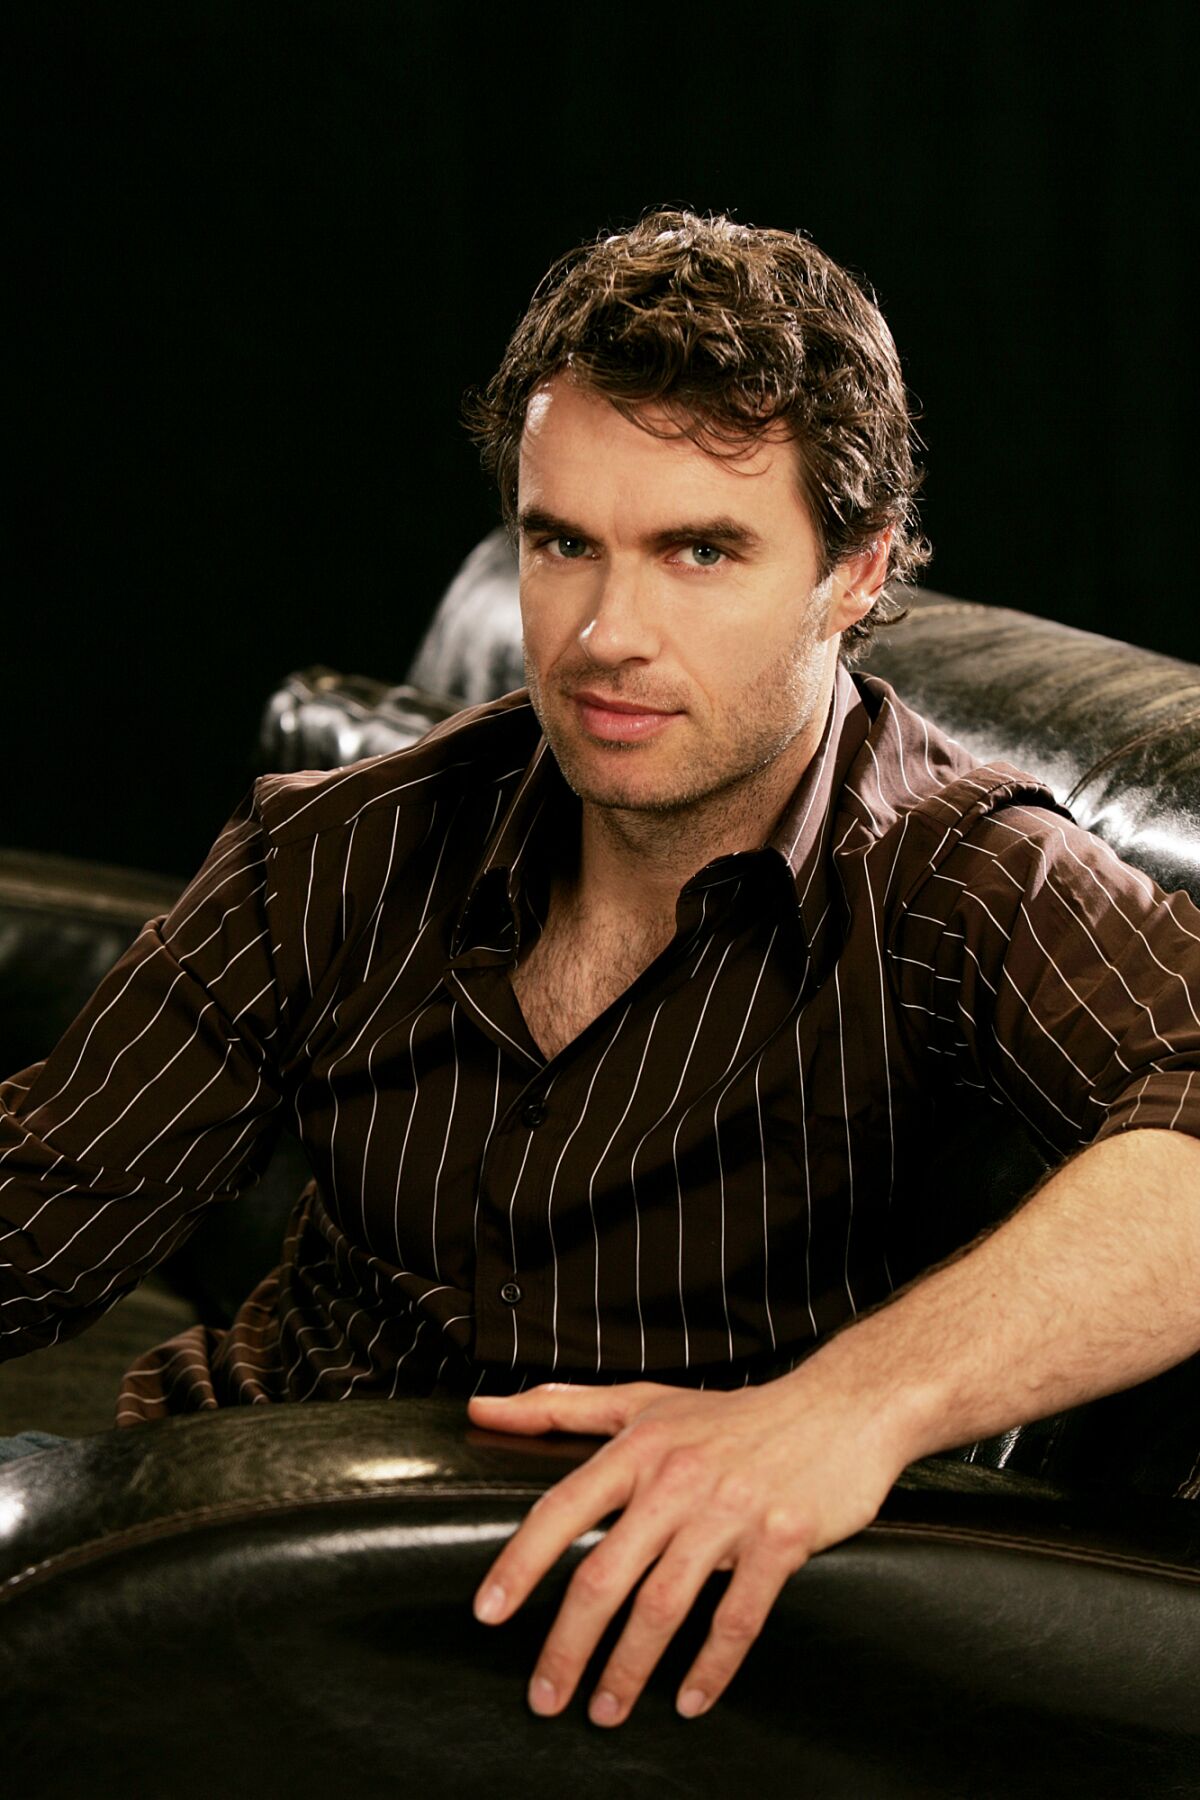 Murray Bartlett starred as Cyrus Foley on the daytime drama "Guiding Light."